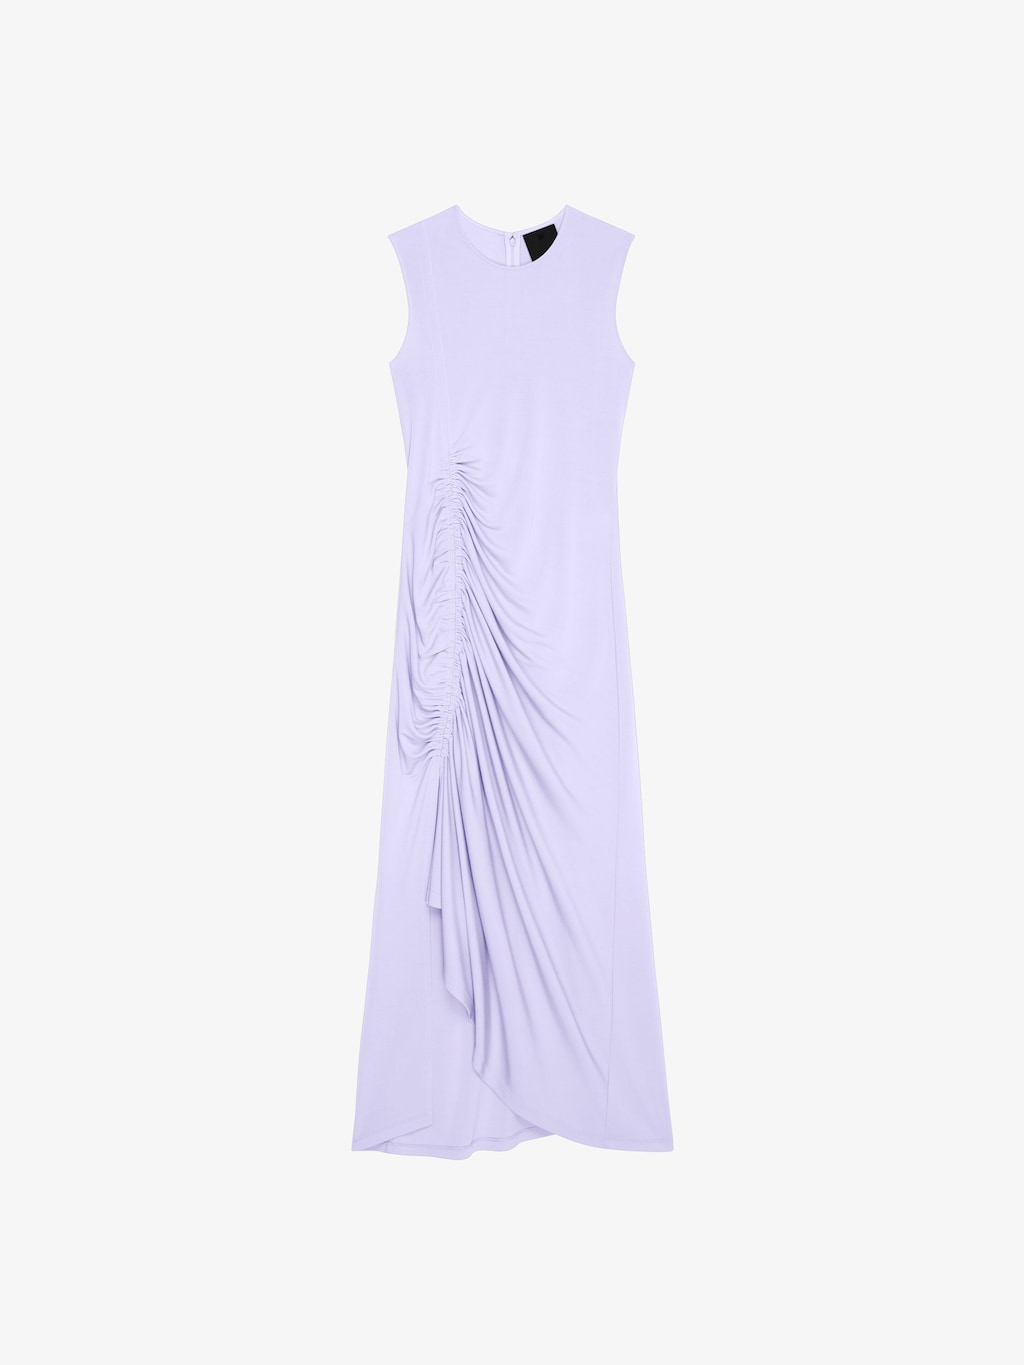 givenchy.com | Draped dress in crepe